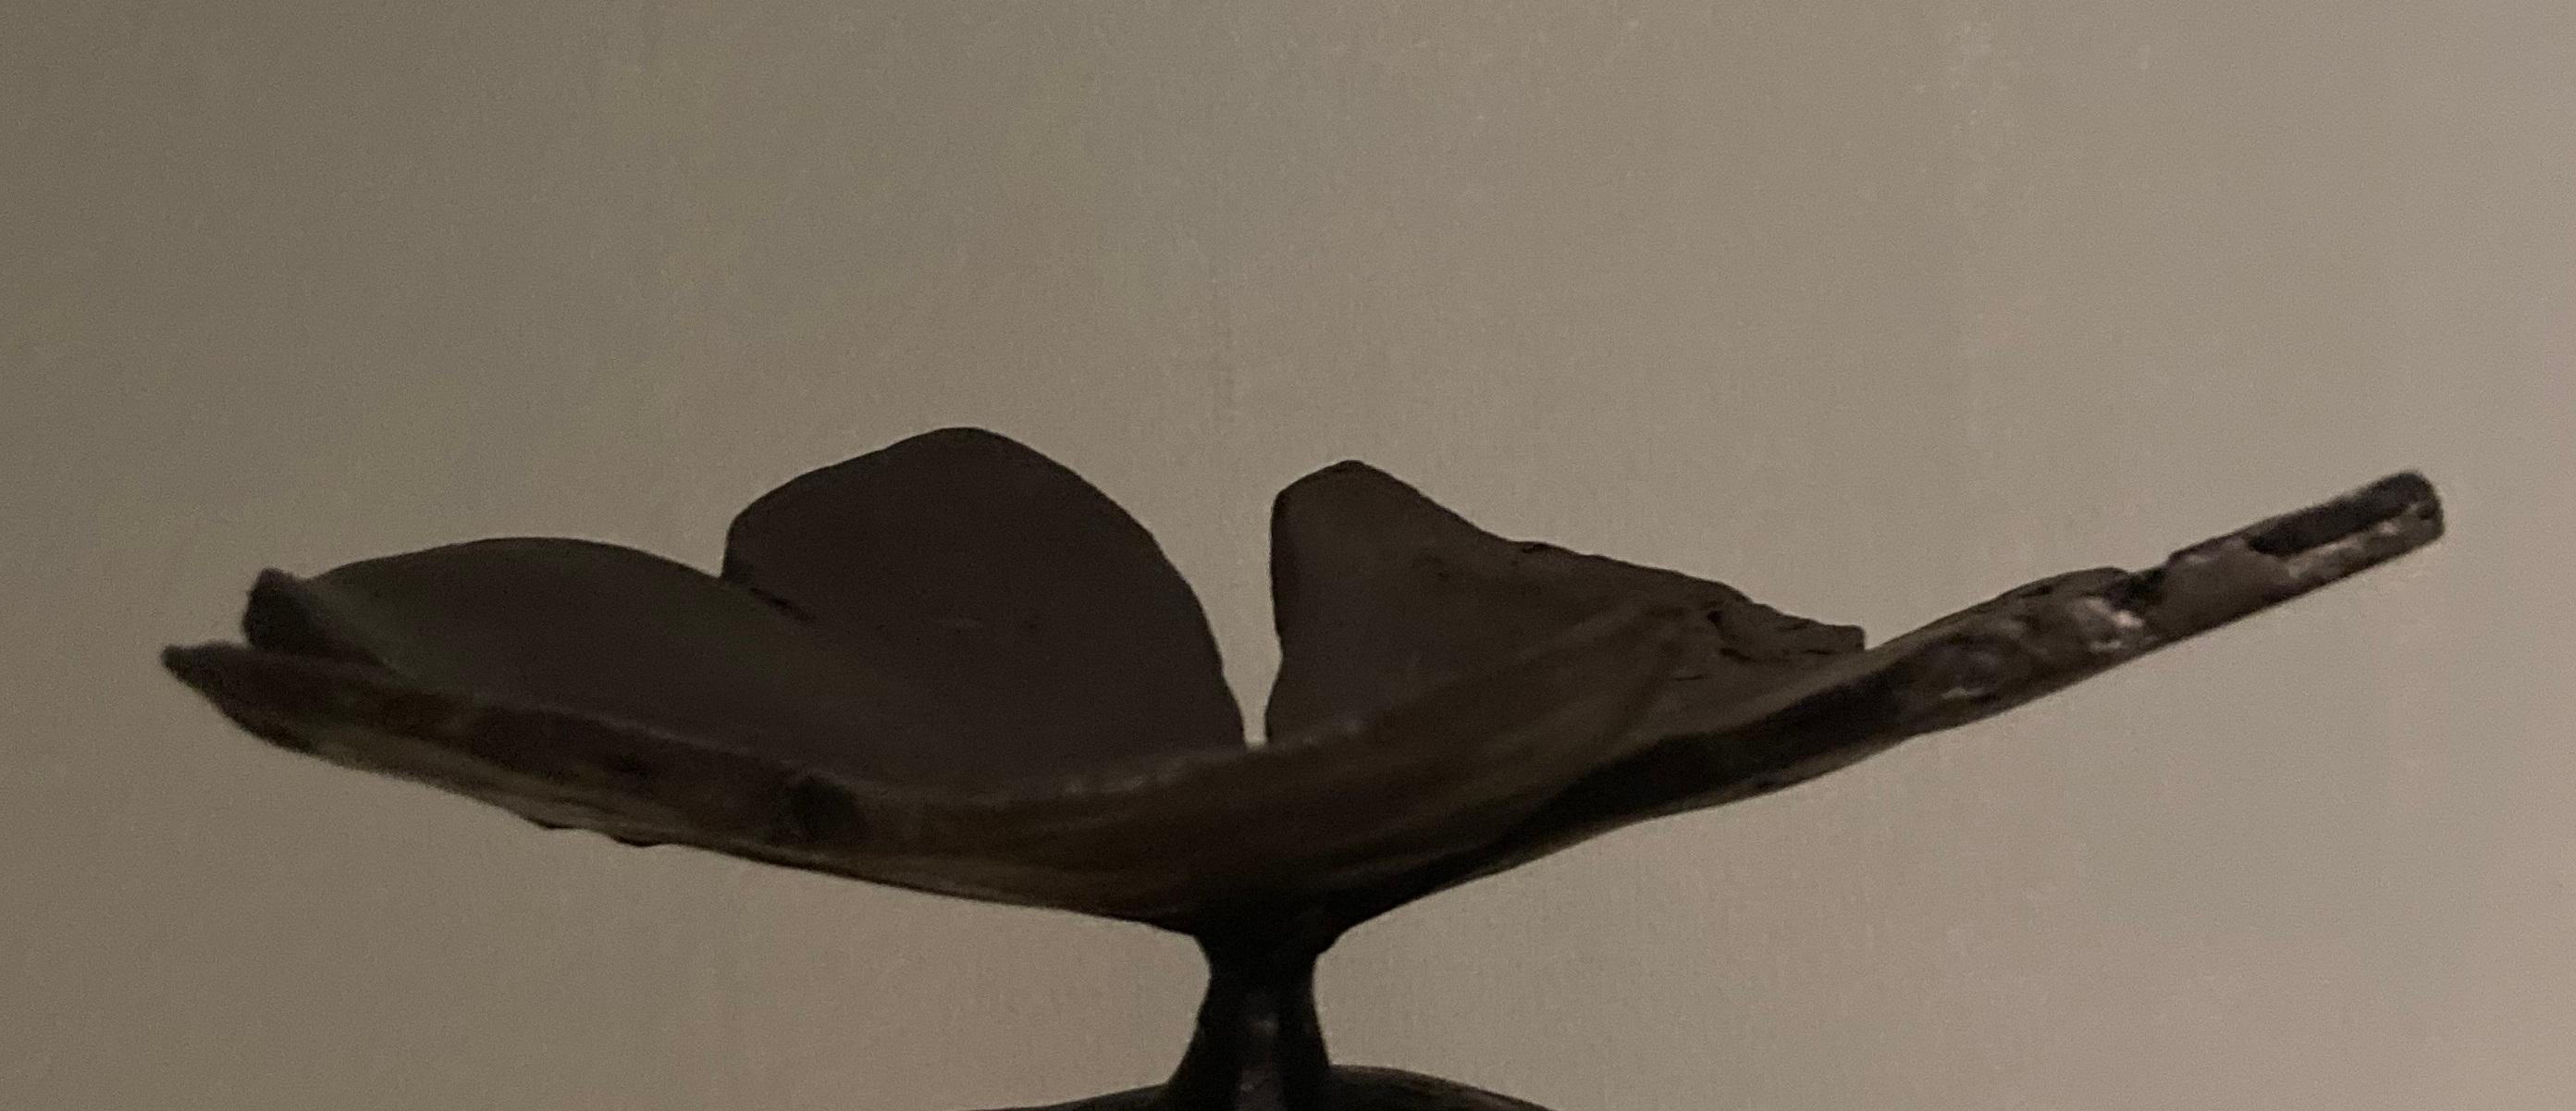 Post-Modern Bronze Patinated Oxalis Decorative Object by Herma de Wit For Sale